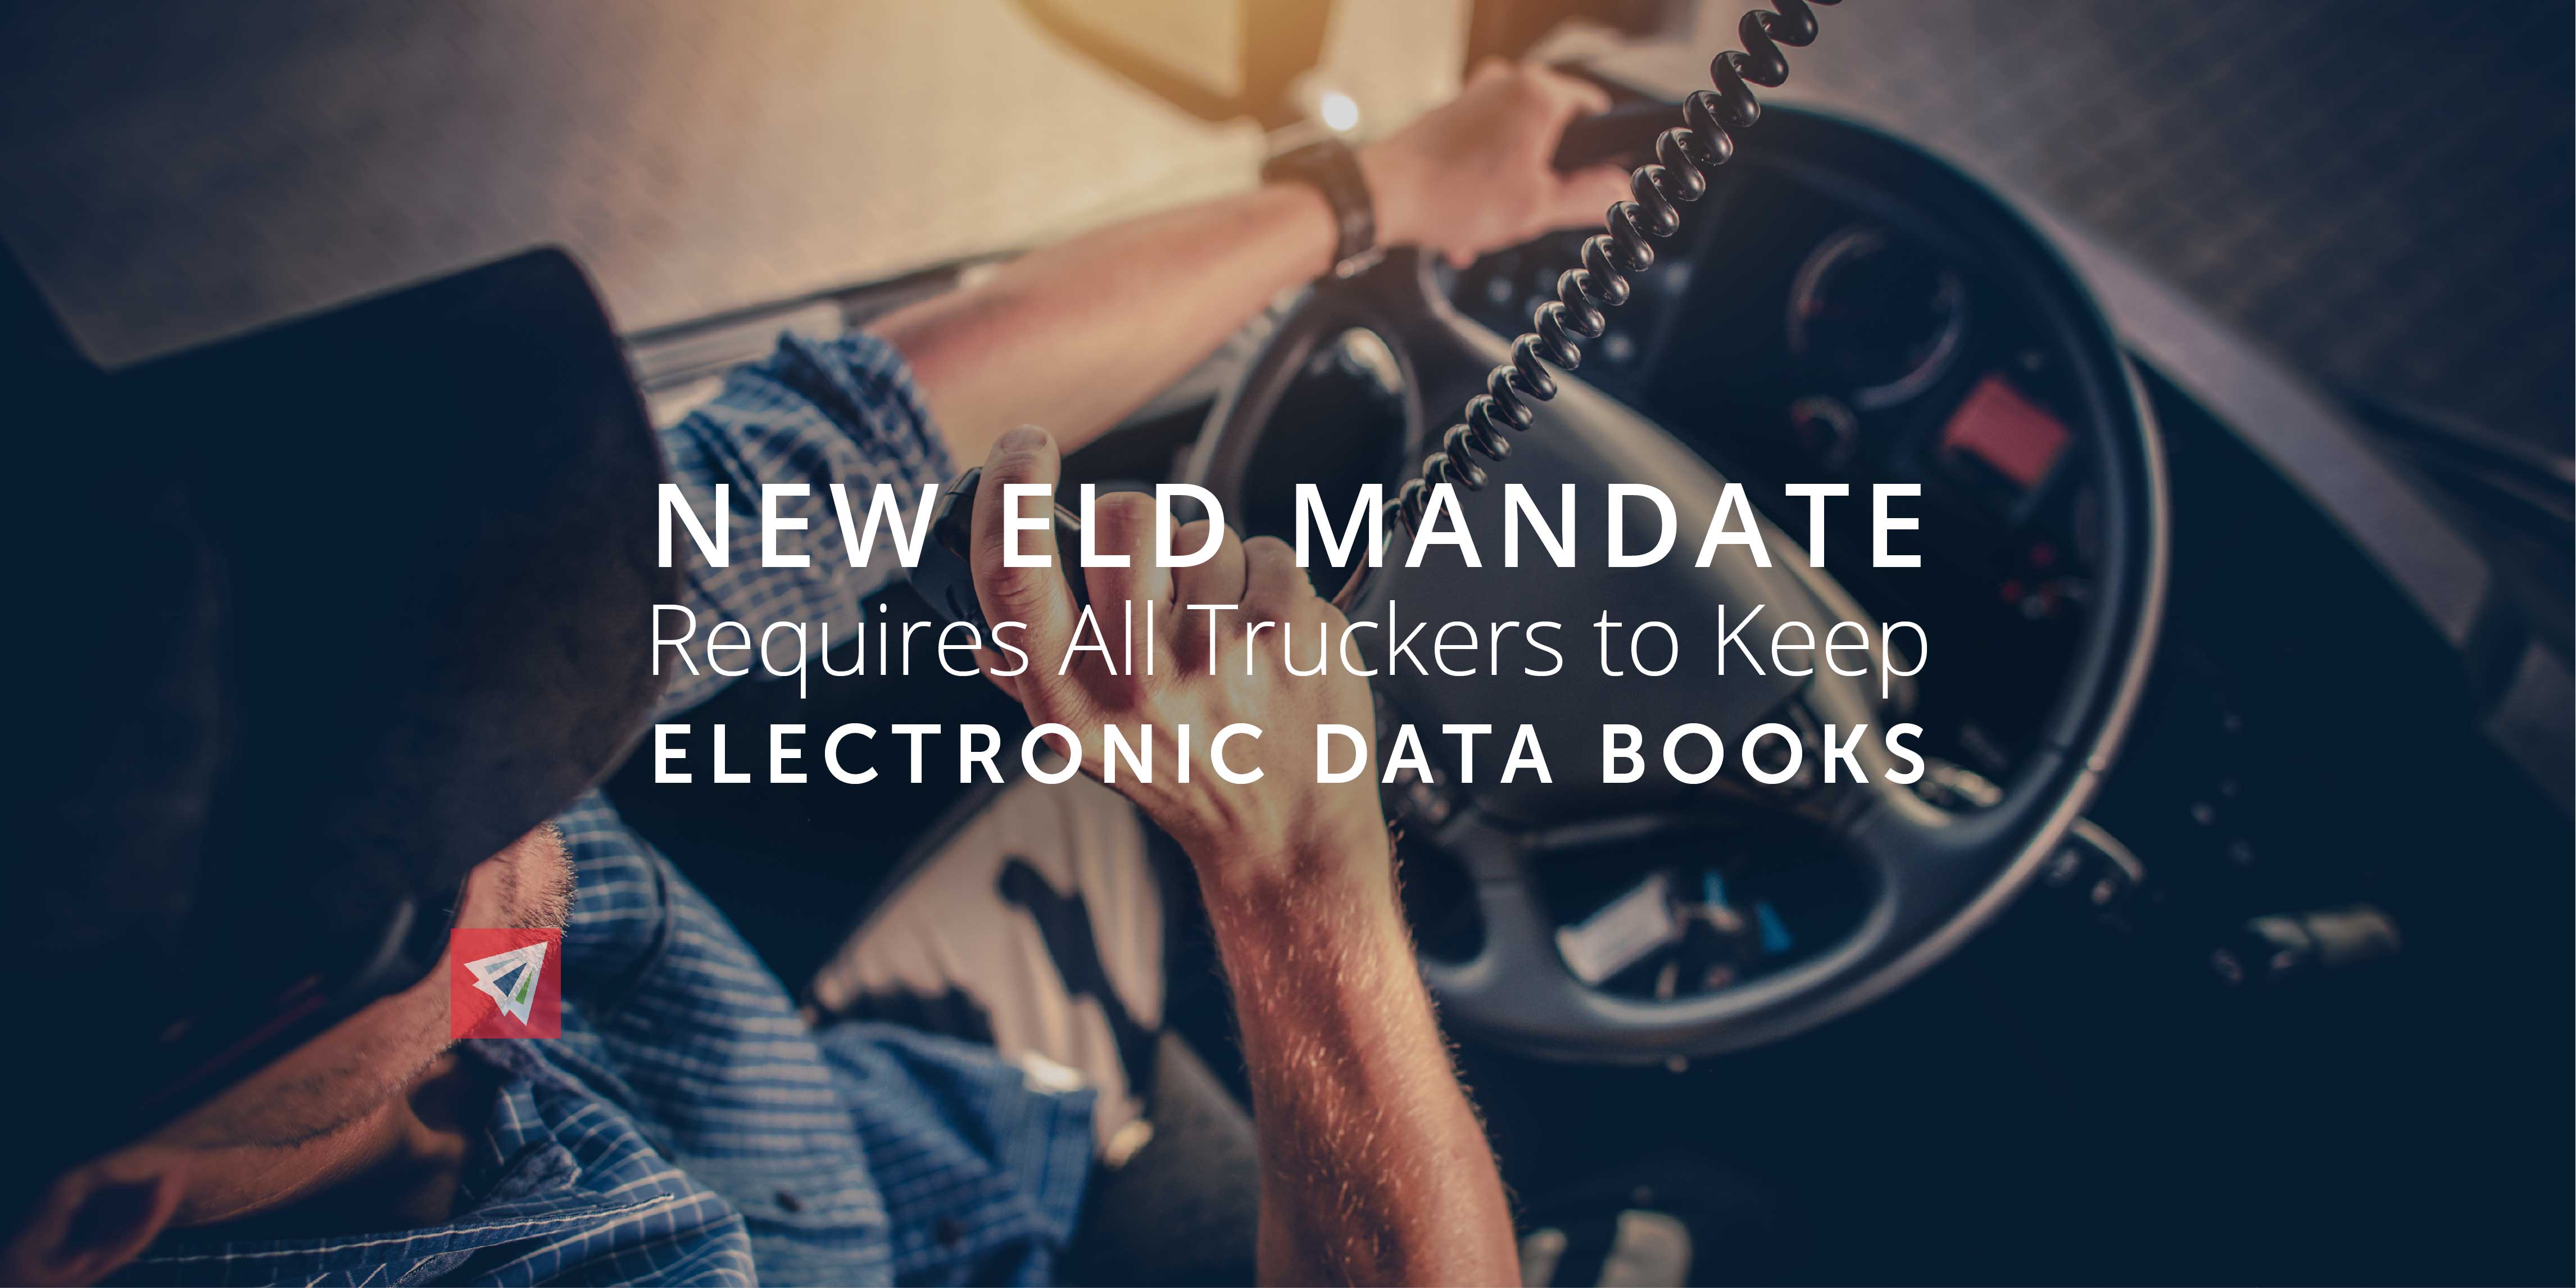 New ELD Mandate Requires All Truckers to Keep Electronic Data Books